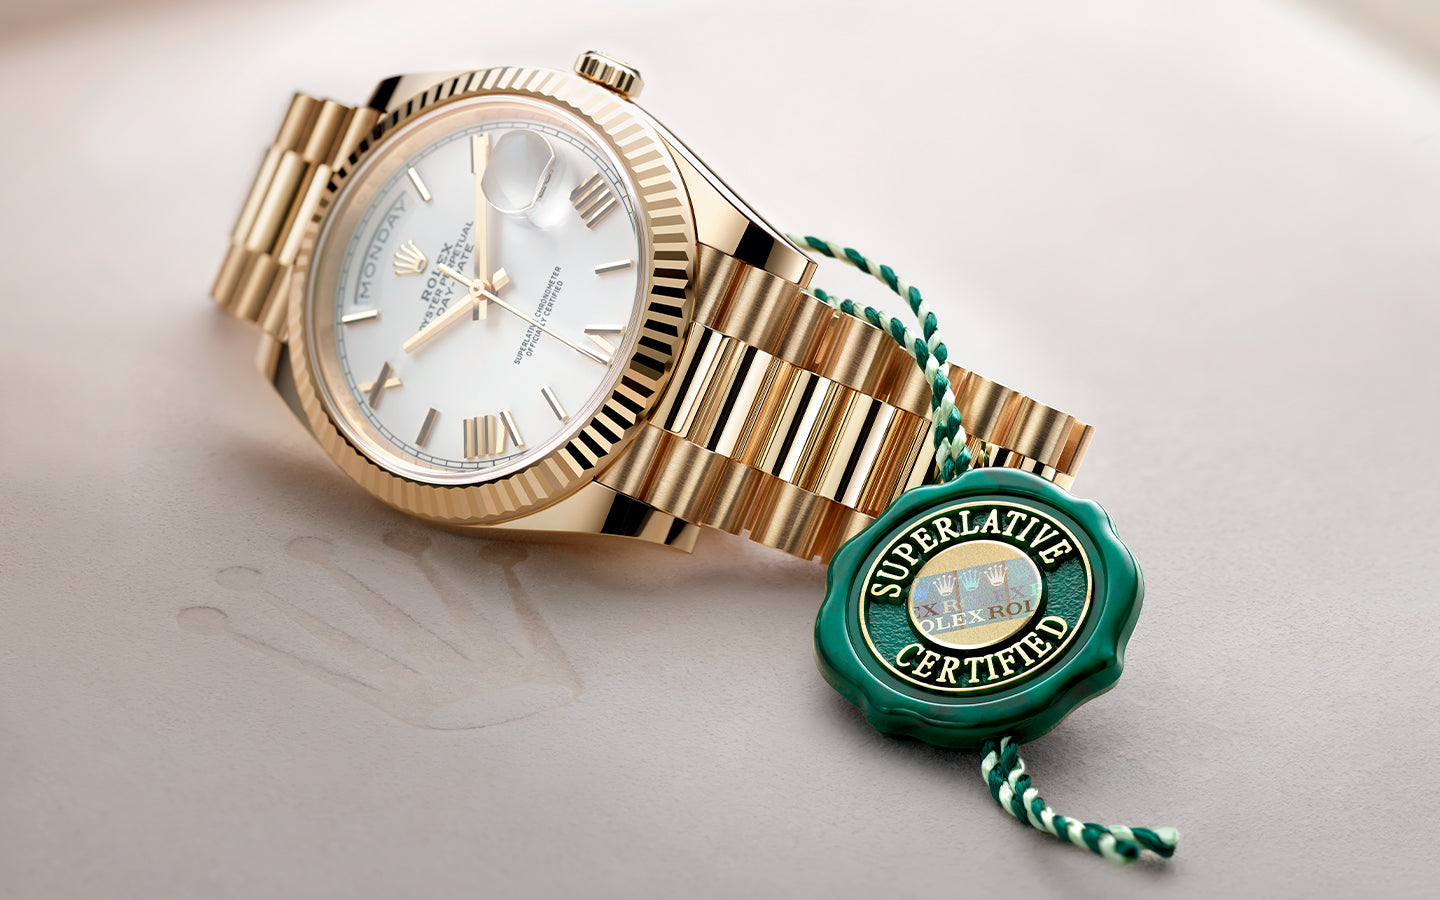 Rolex Day-Date in Yellow Gold with Superlative Certified Tag